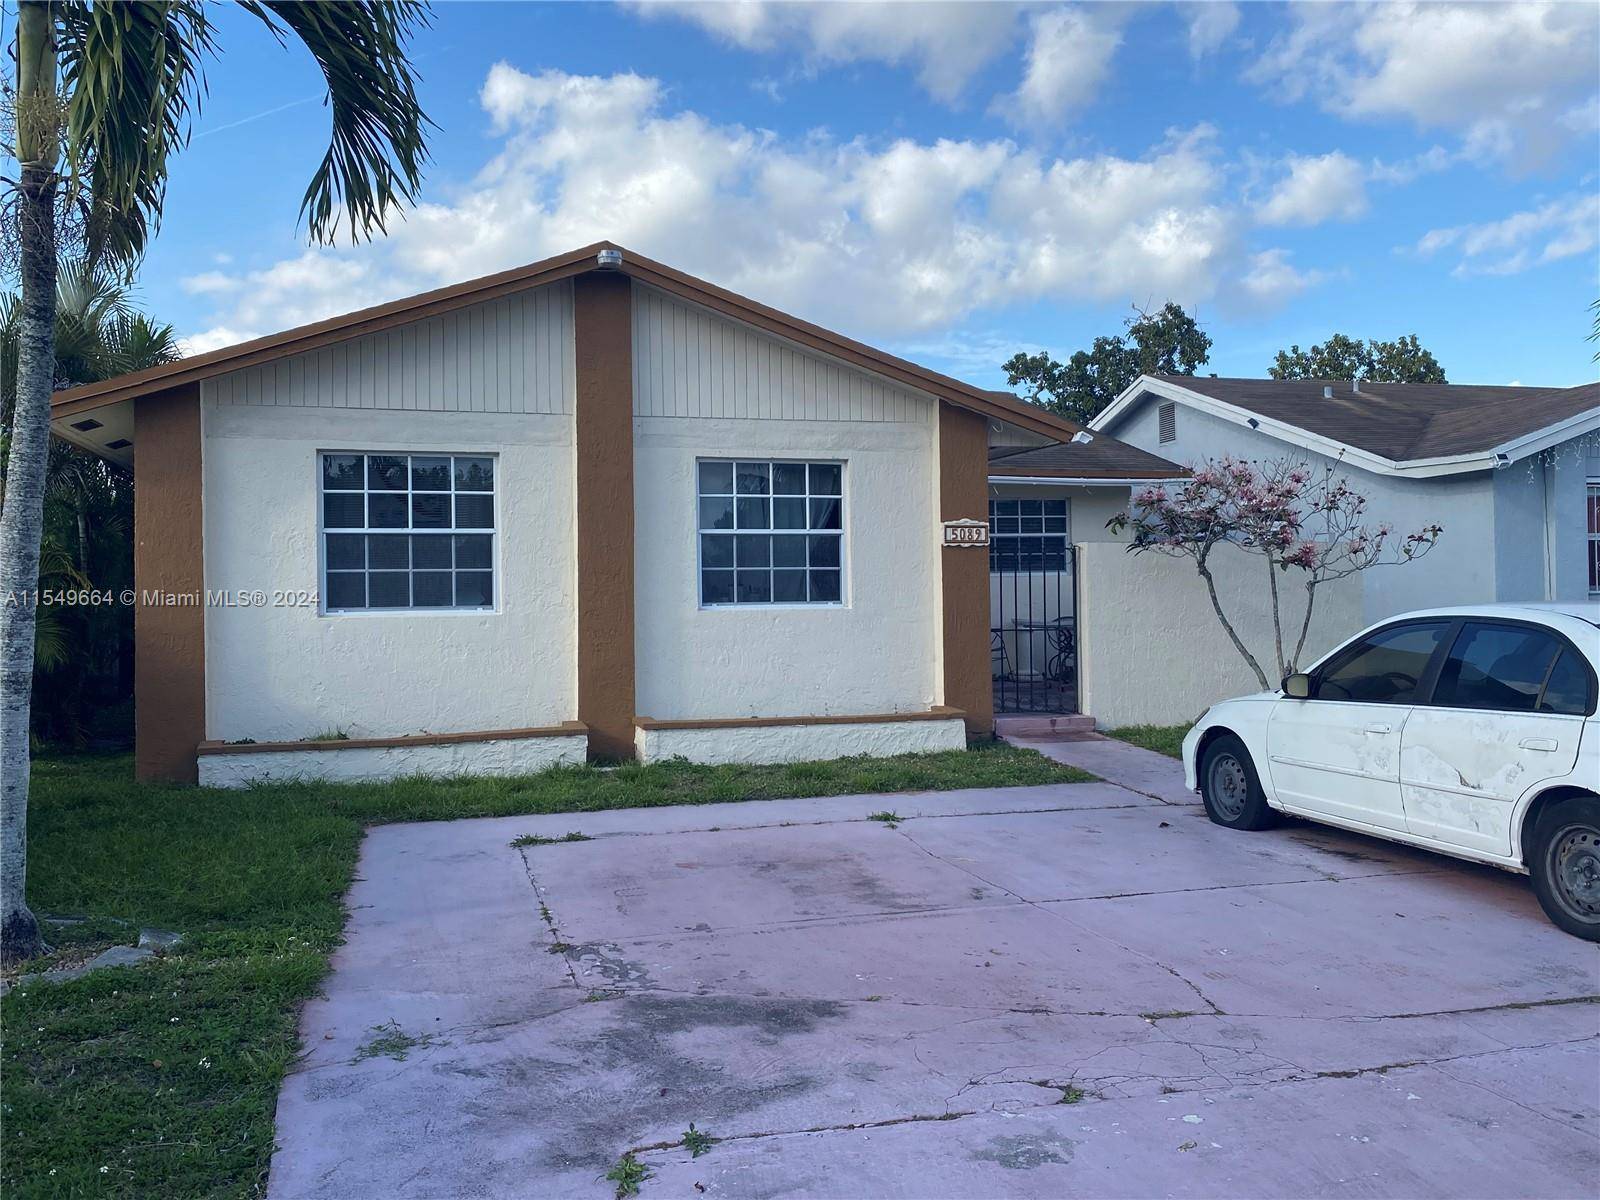 Nice 3 2 single family home at Lakes of Acadia in Miami Gardens close to schools, shopping centers and highways.